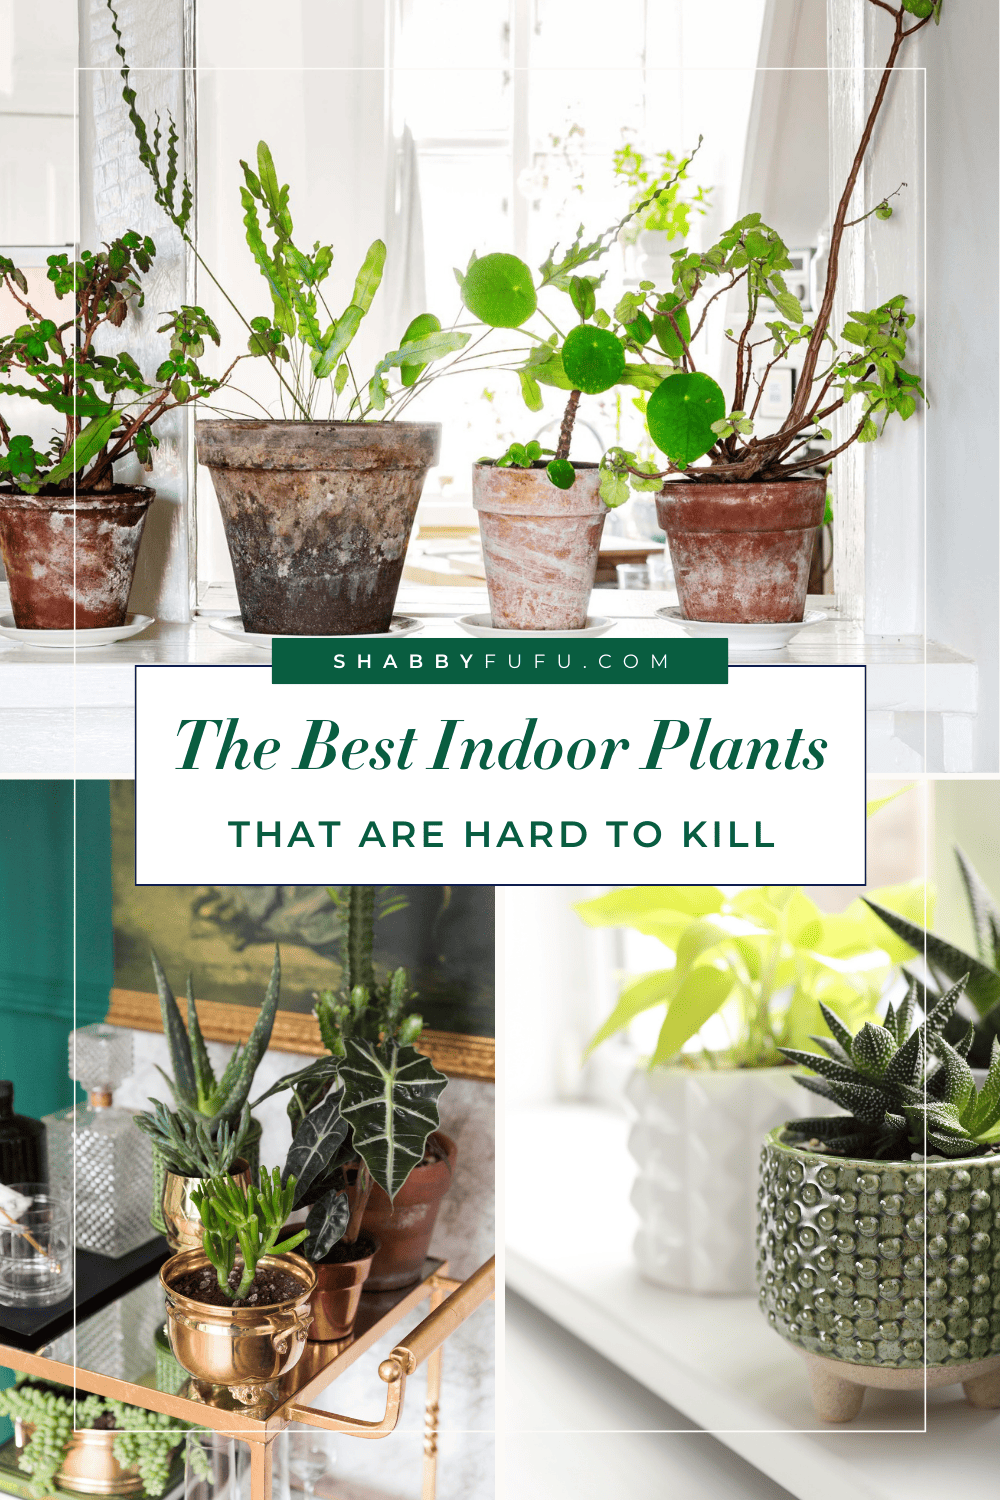 Decorative Pinterest graphic titled "The Best Indoor Plamts that are hard to kill"